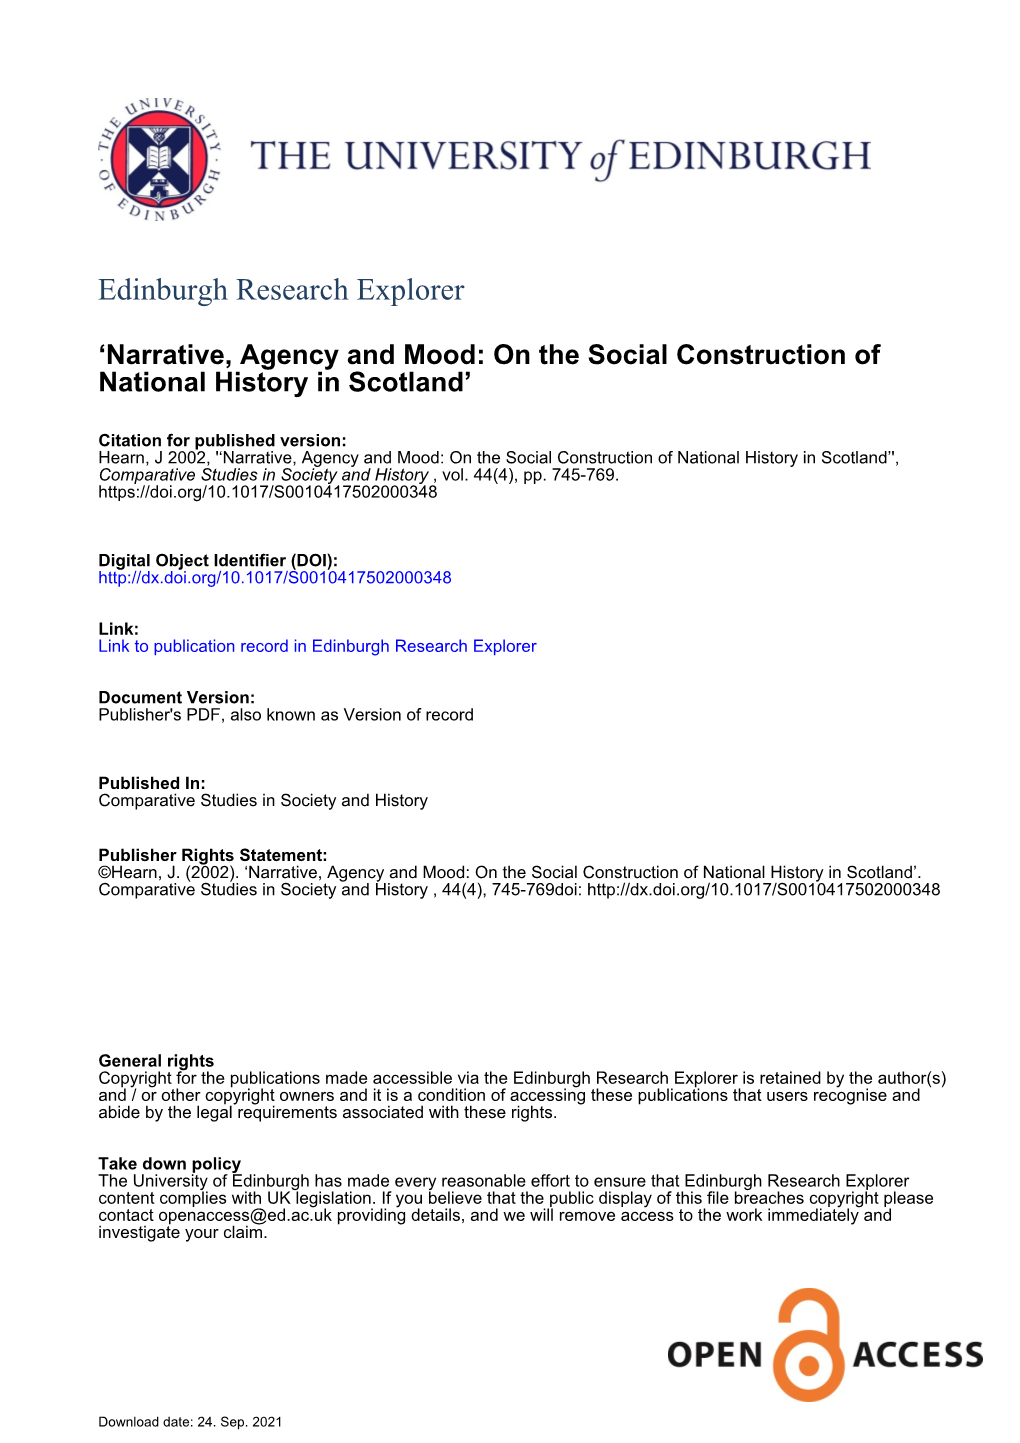 Narrative, Agency, and Mood: on the Social Construction of National History in Scotland